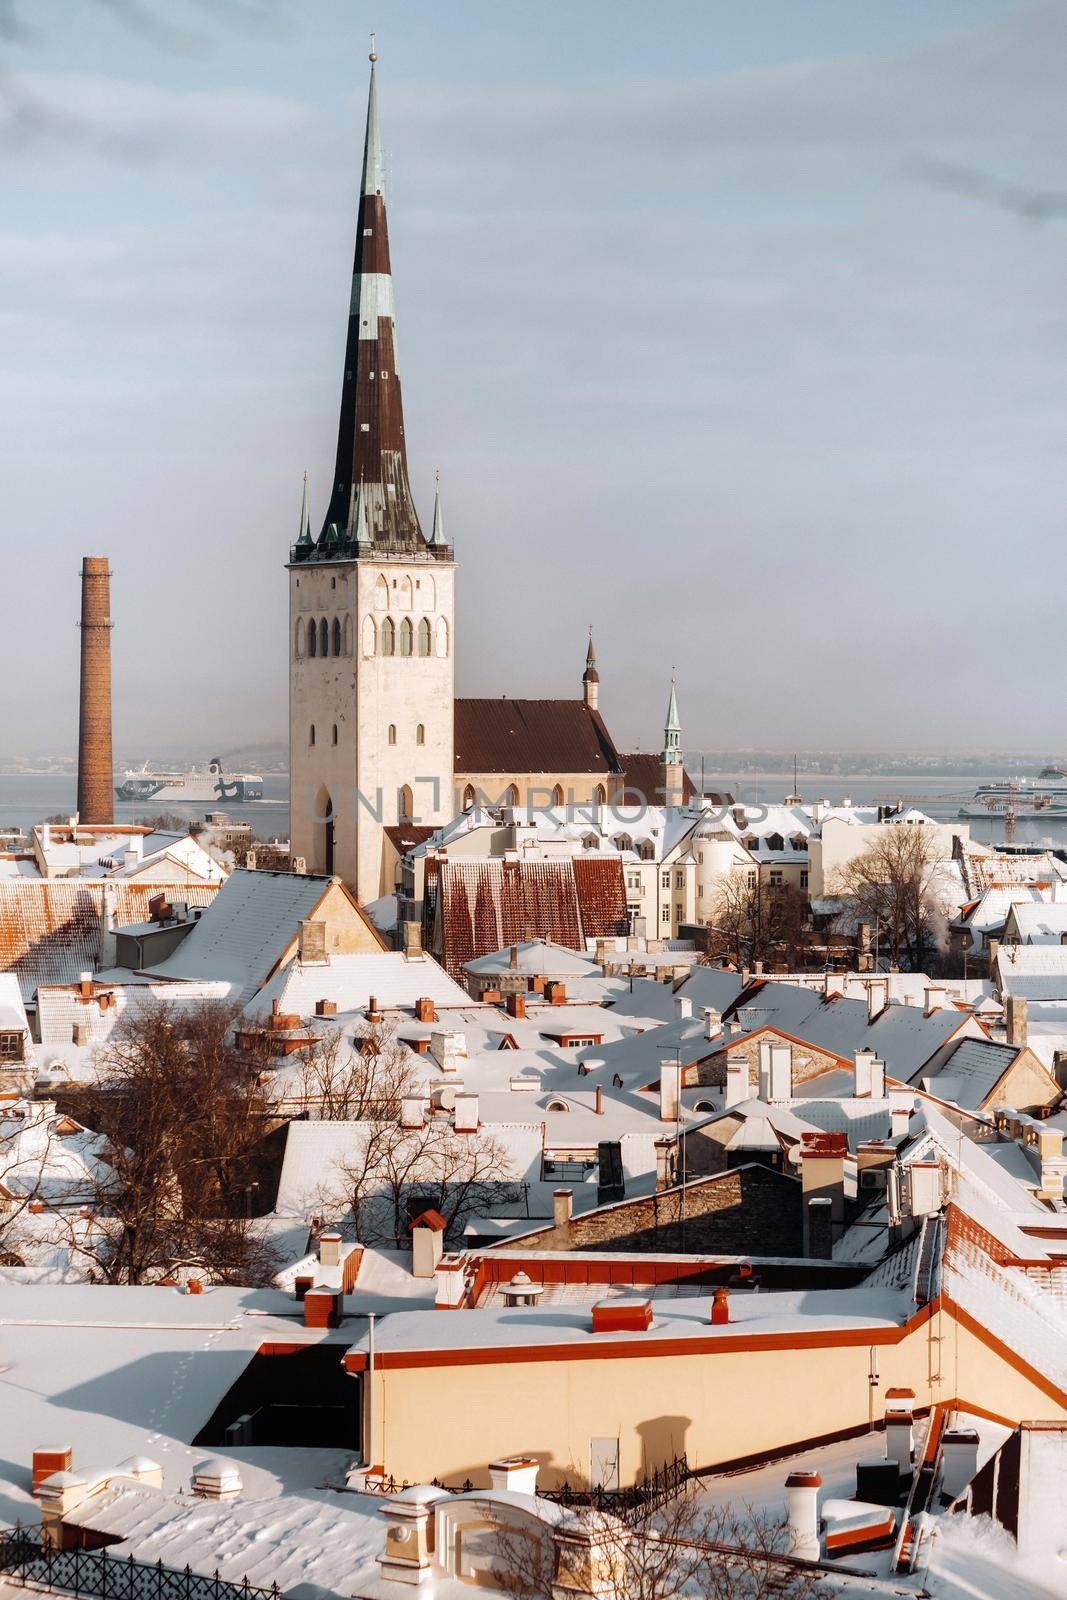 Winter View of the old town of Tallinn.Snow-covered city near the Baltic sea. Estonia by Lobachad